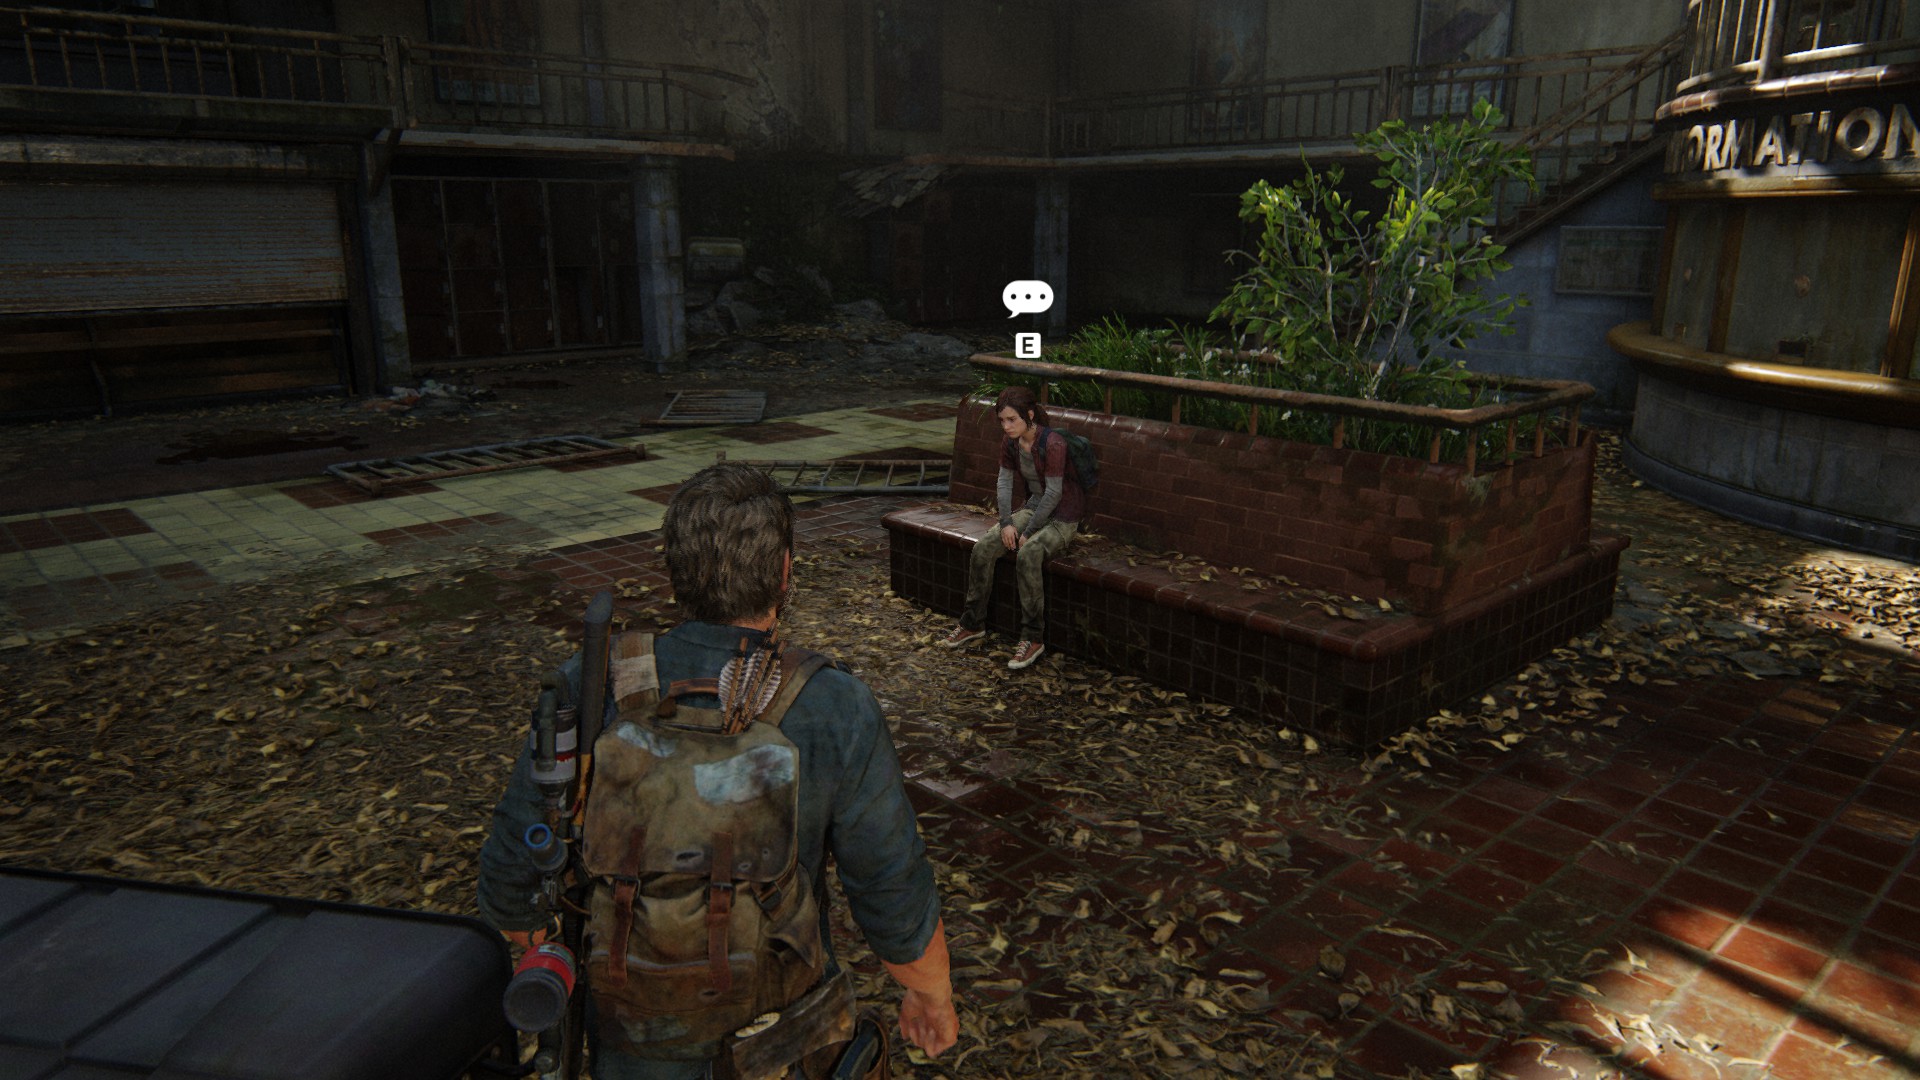 THE LAST OF US LEFT BEHIND PC Gameplay Walkthrough (Full Game) 